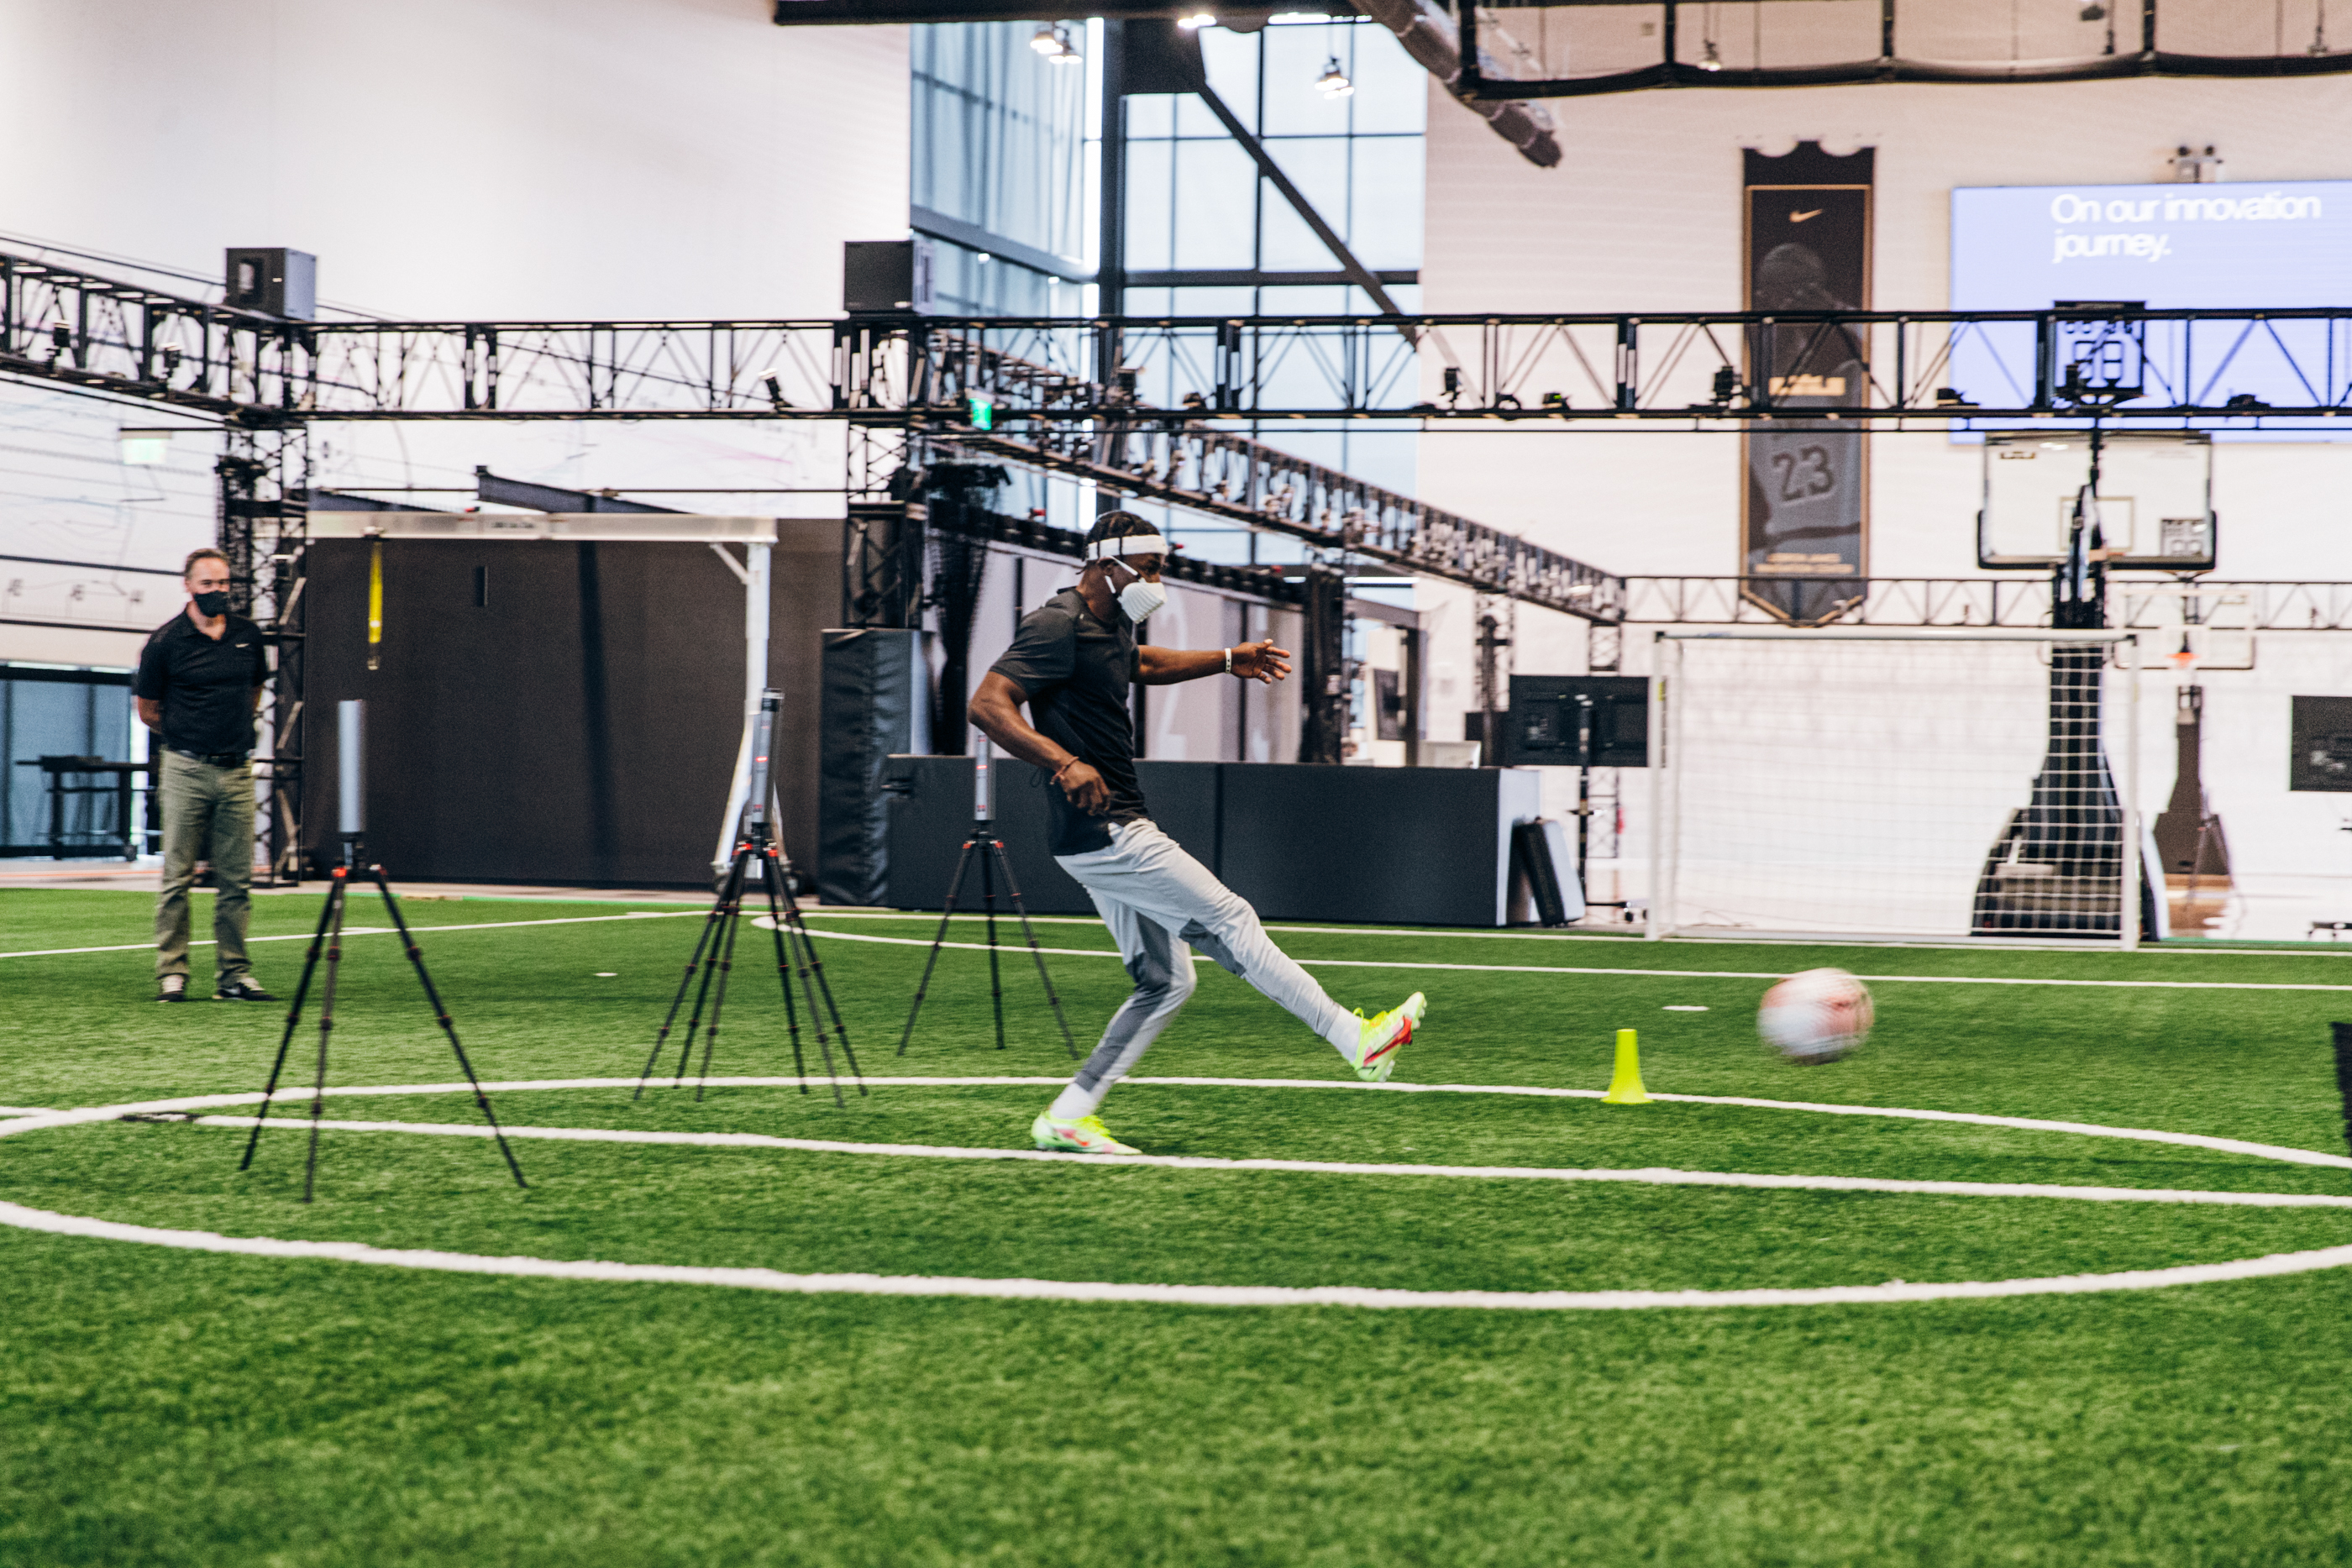 Man simulating a shot at goal in the Nike Sport Research Lab